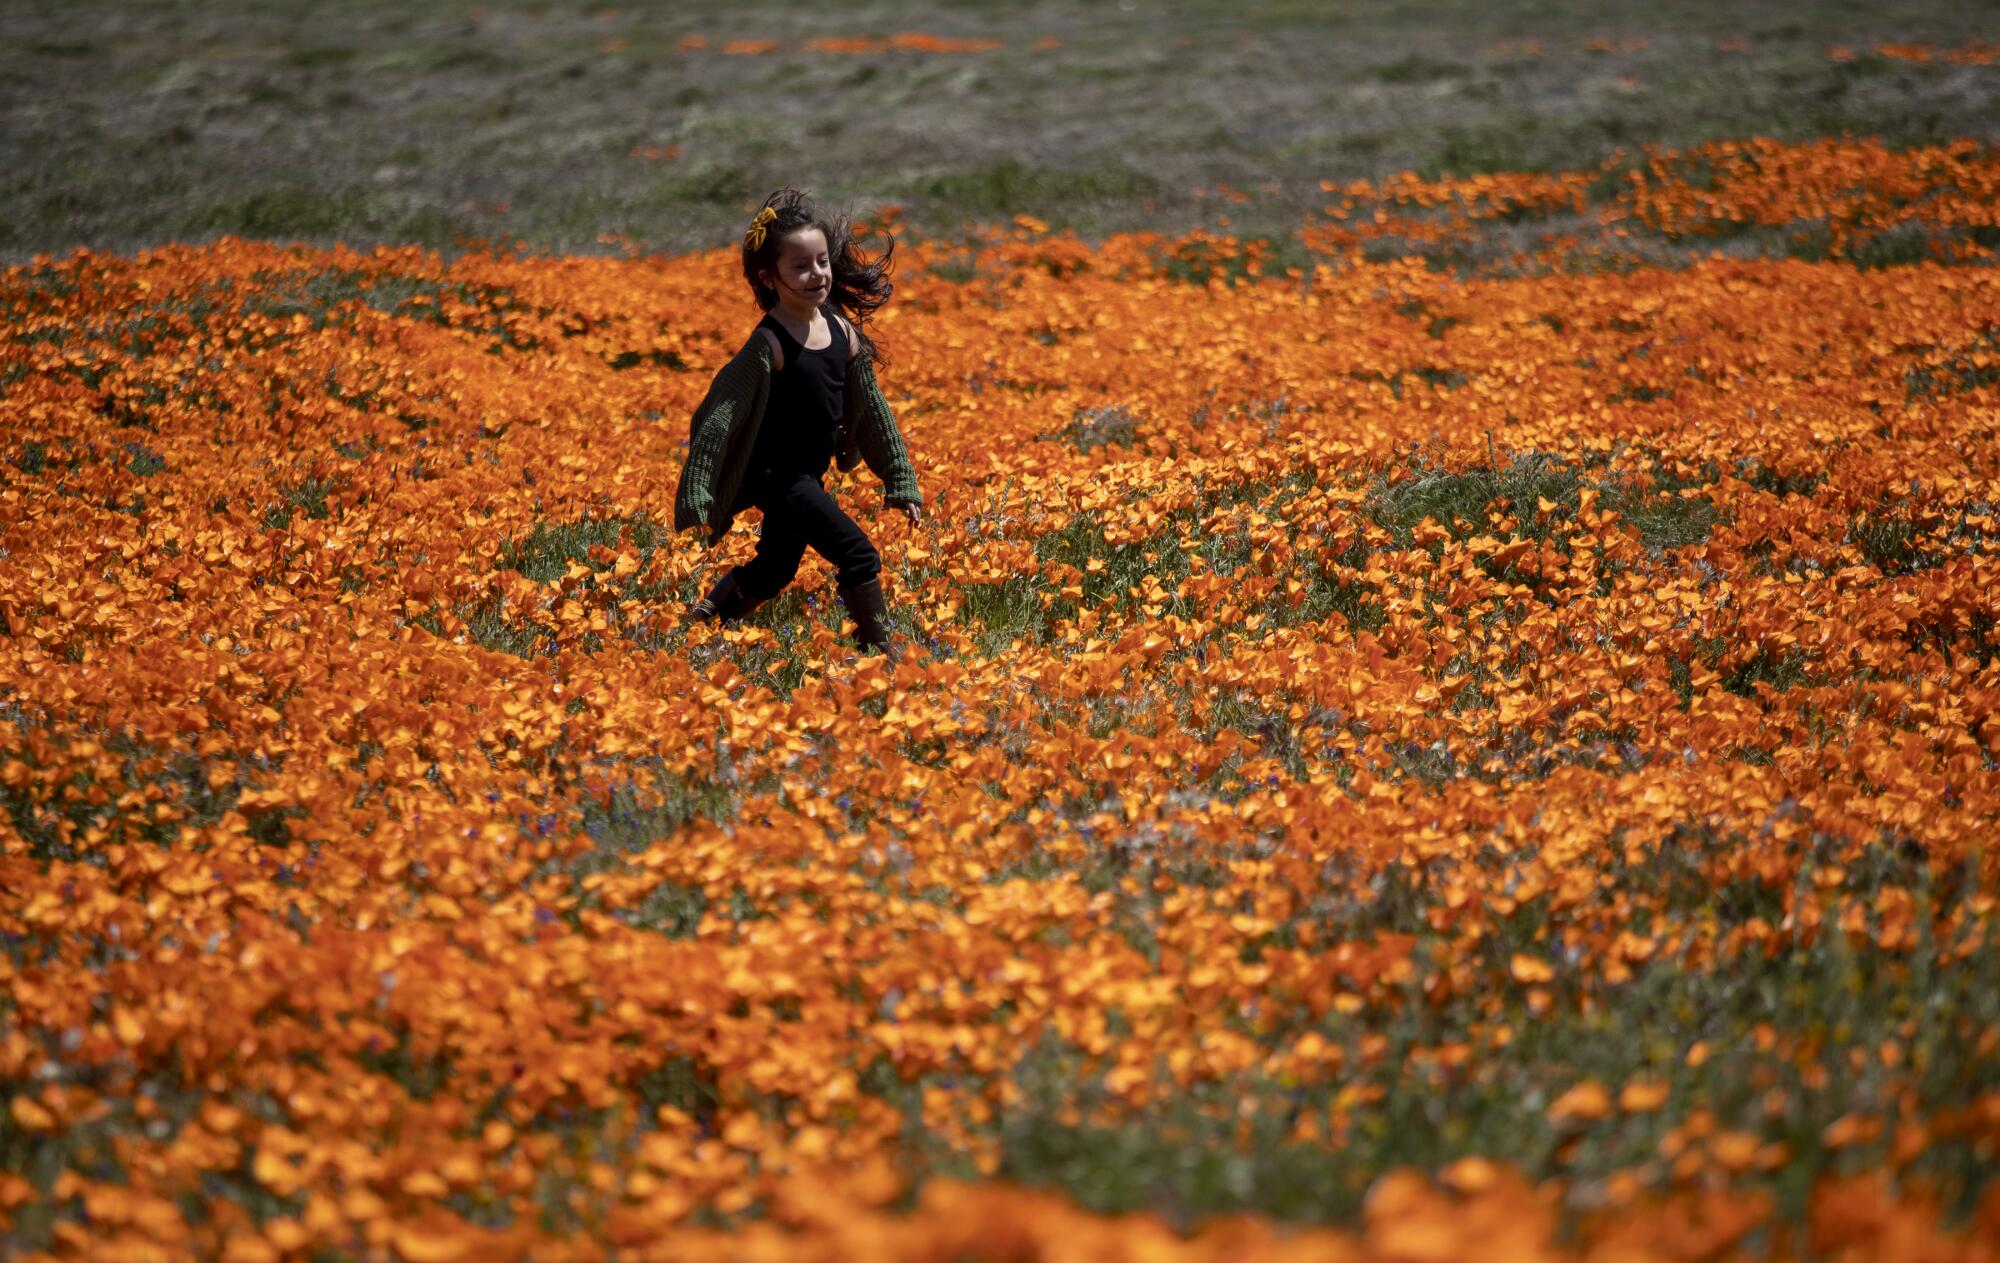 Isabella Cardenas, 7, runs through blooming California poppies in a field in Lancaster.